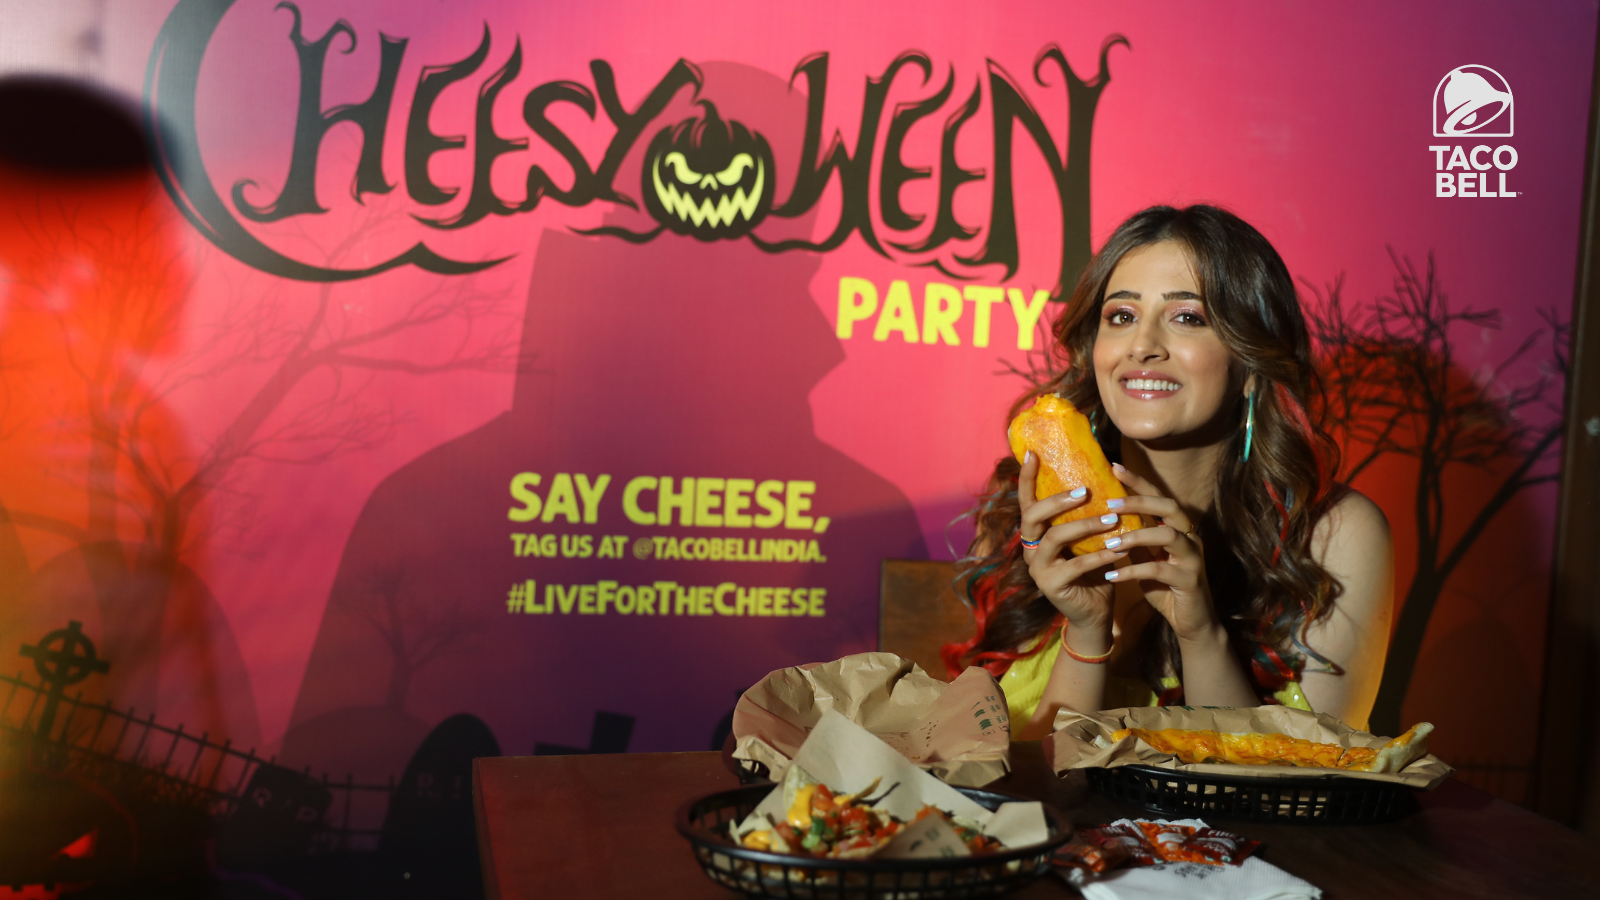 TACO BELL DEBUTS ‘CHEESYWEEN’ PARTY TO CELEBRATE GRILLED CHEESE BURRITO & QUESADILLA THIS HALLOWEEN